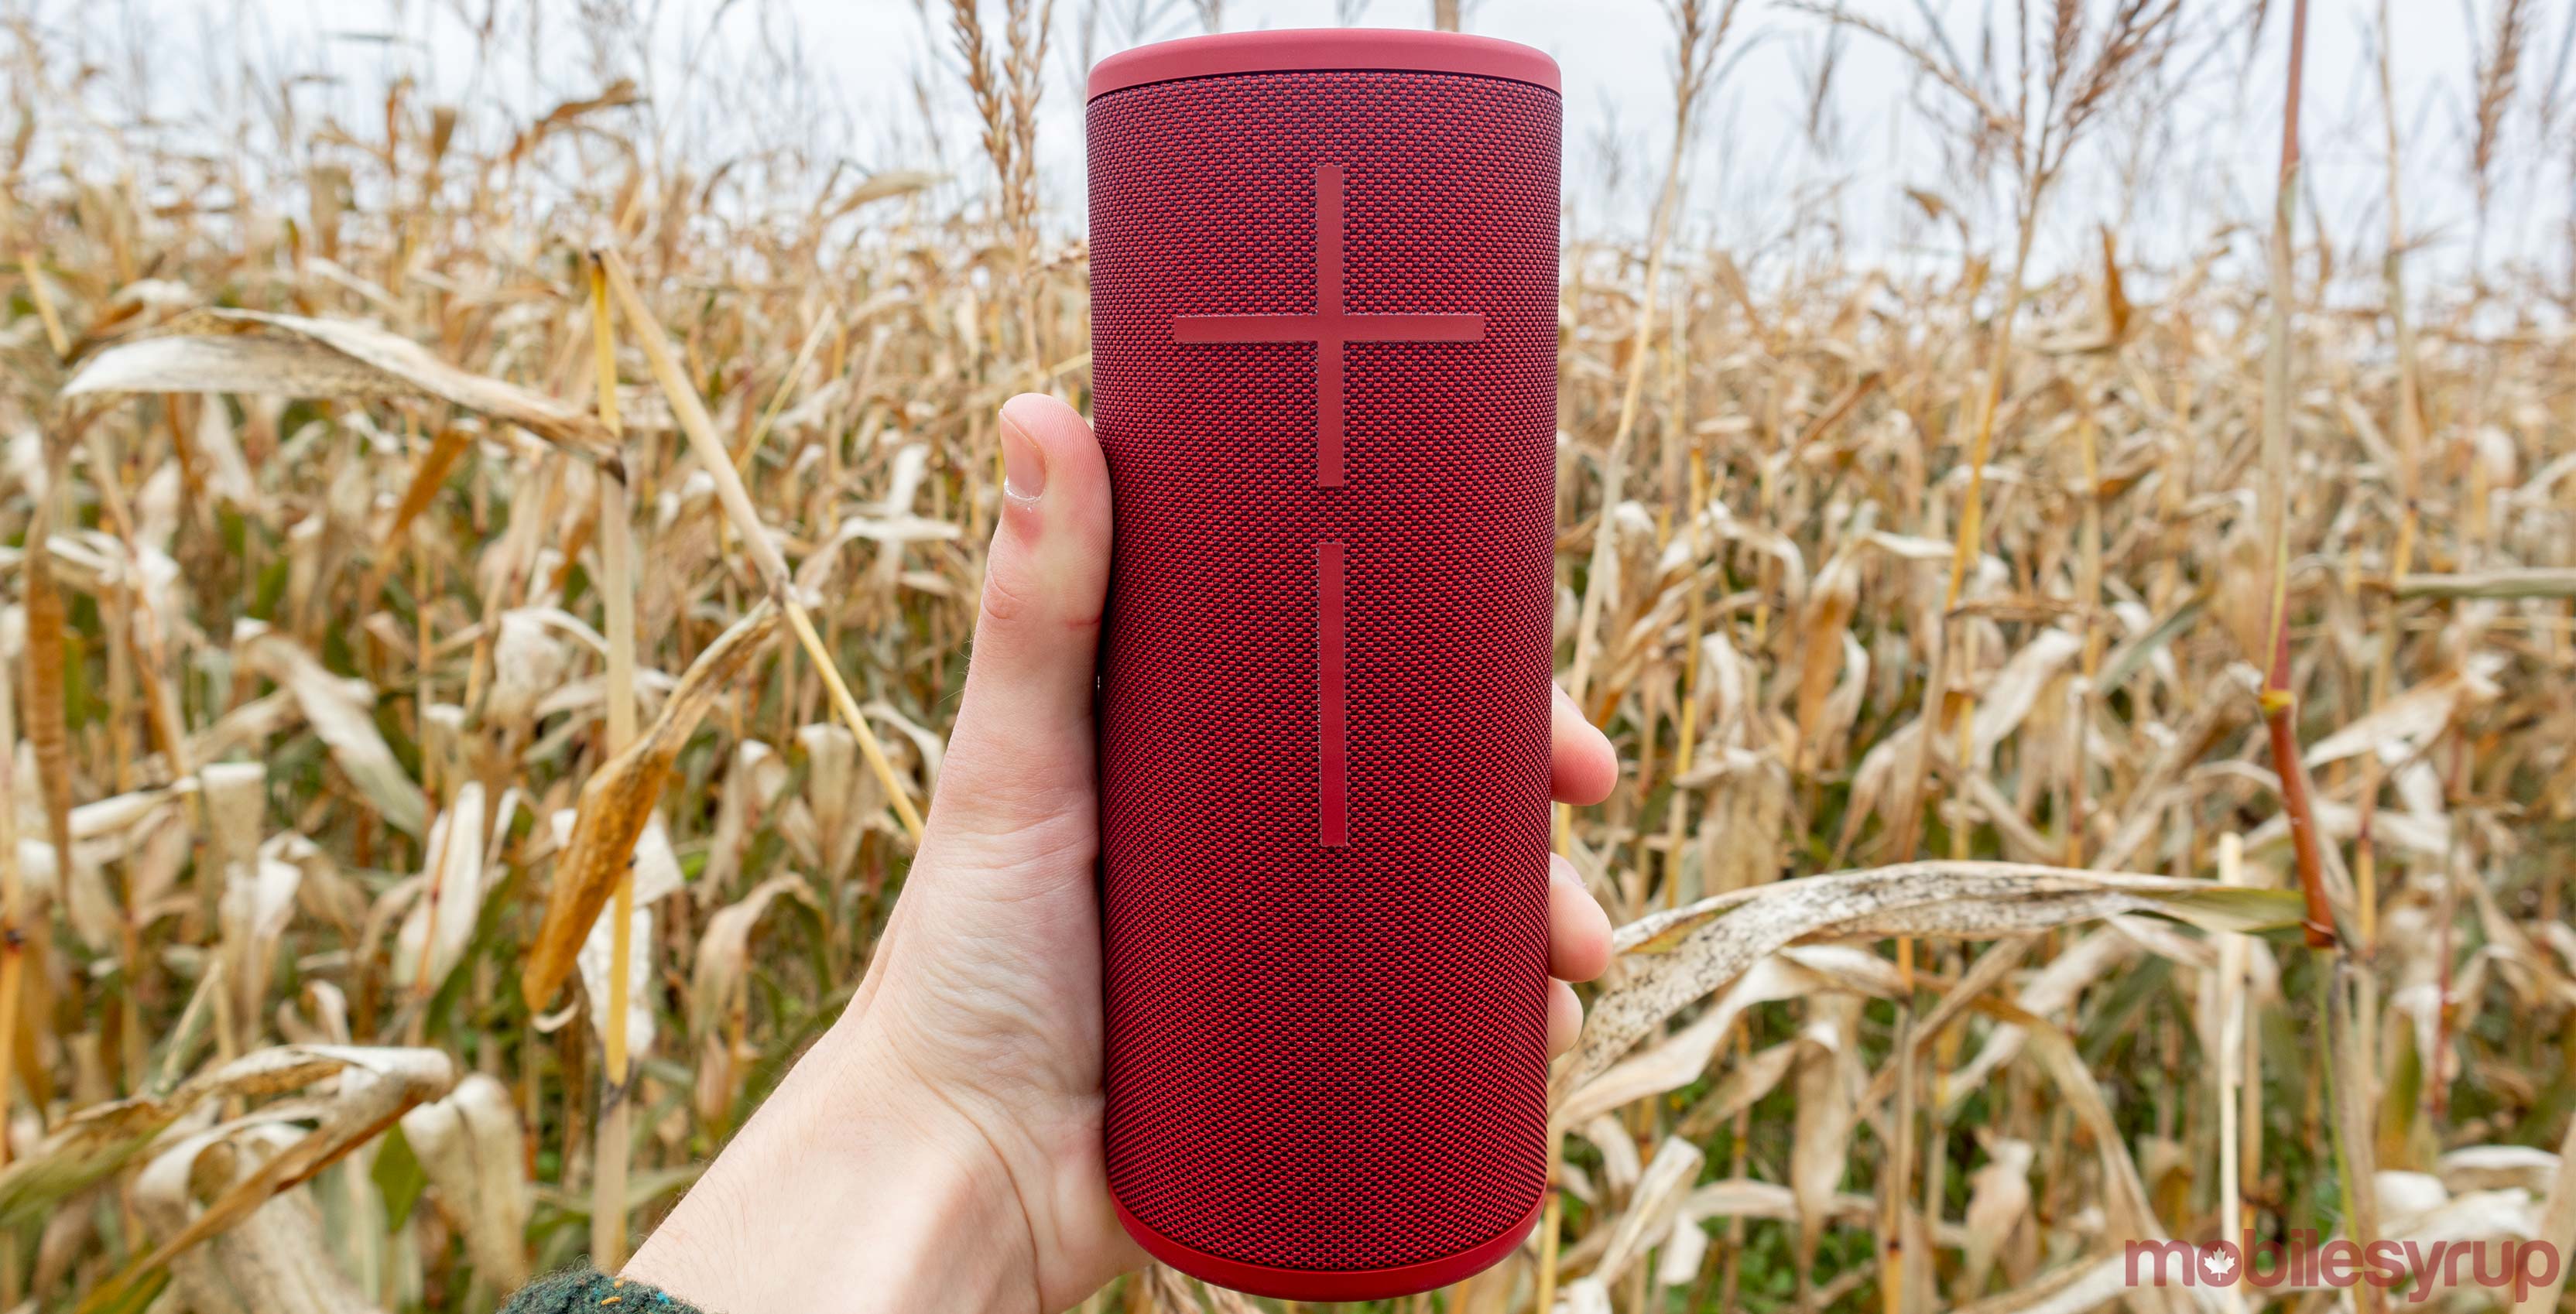 UE Boom 3 Review: A faithful speaker that surprises at every turn